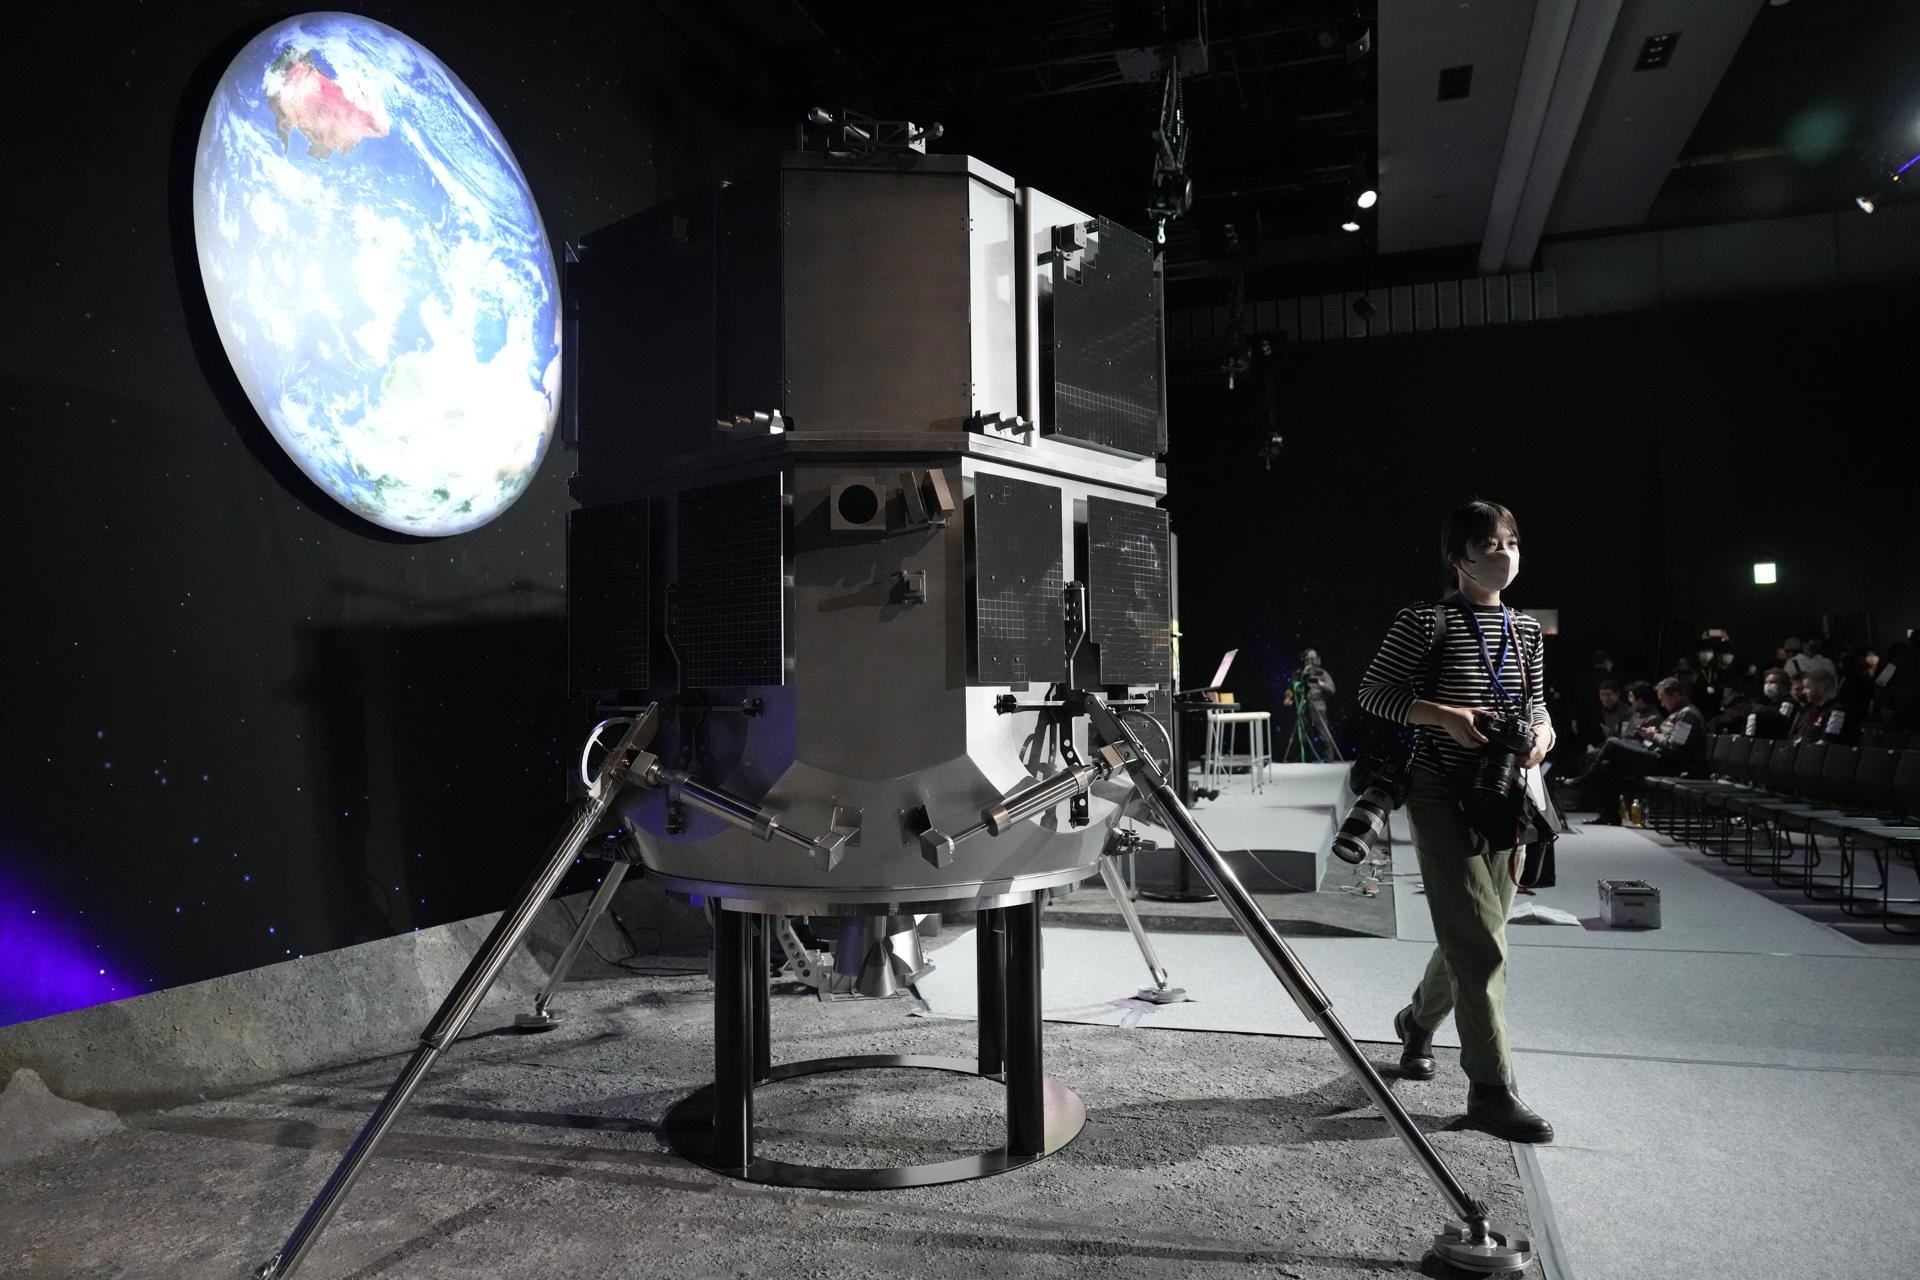 A model of the lander of Japanese lunar landing mission Hakuto-R Mission1 (Hakuto-R M1) is displayed at the National Museum of Emerging Science and Innovation in Tokyo, Japan, early 26 April 2023. EFE-EPA FILE/FRANCK ROBICHON